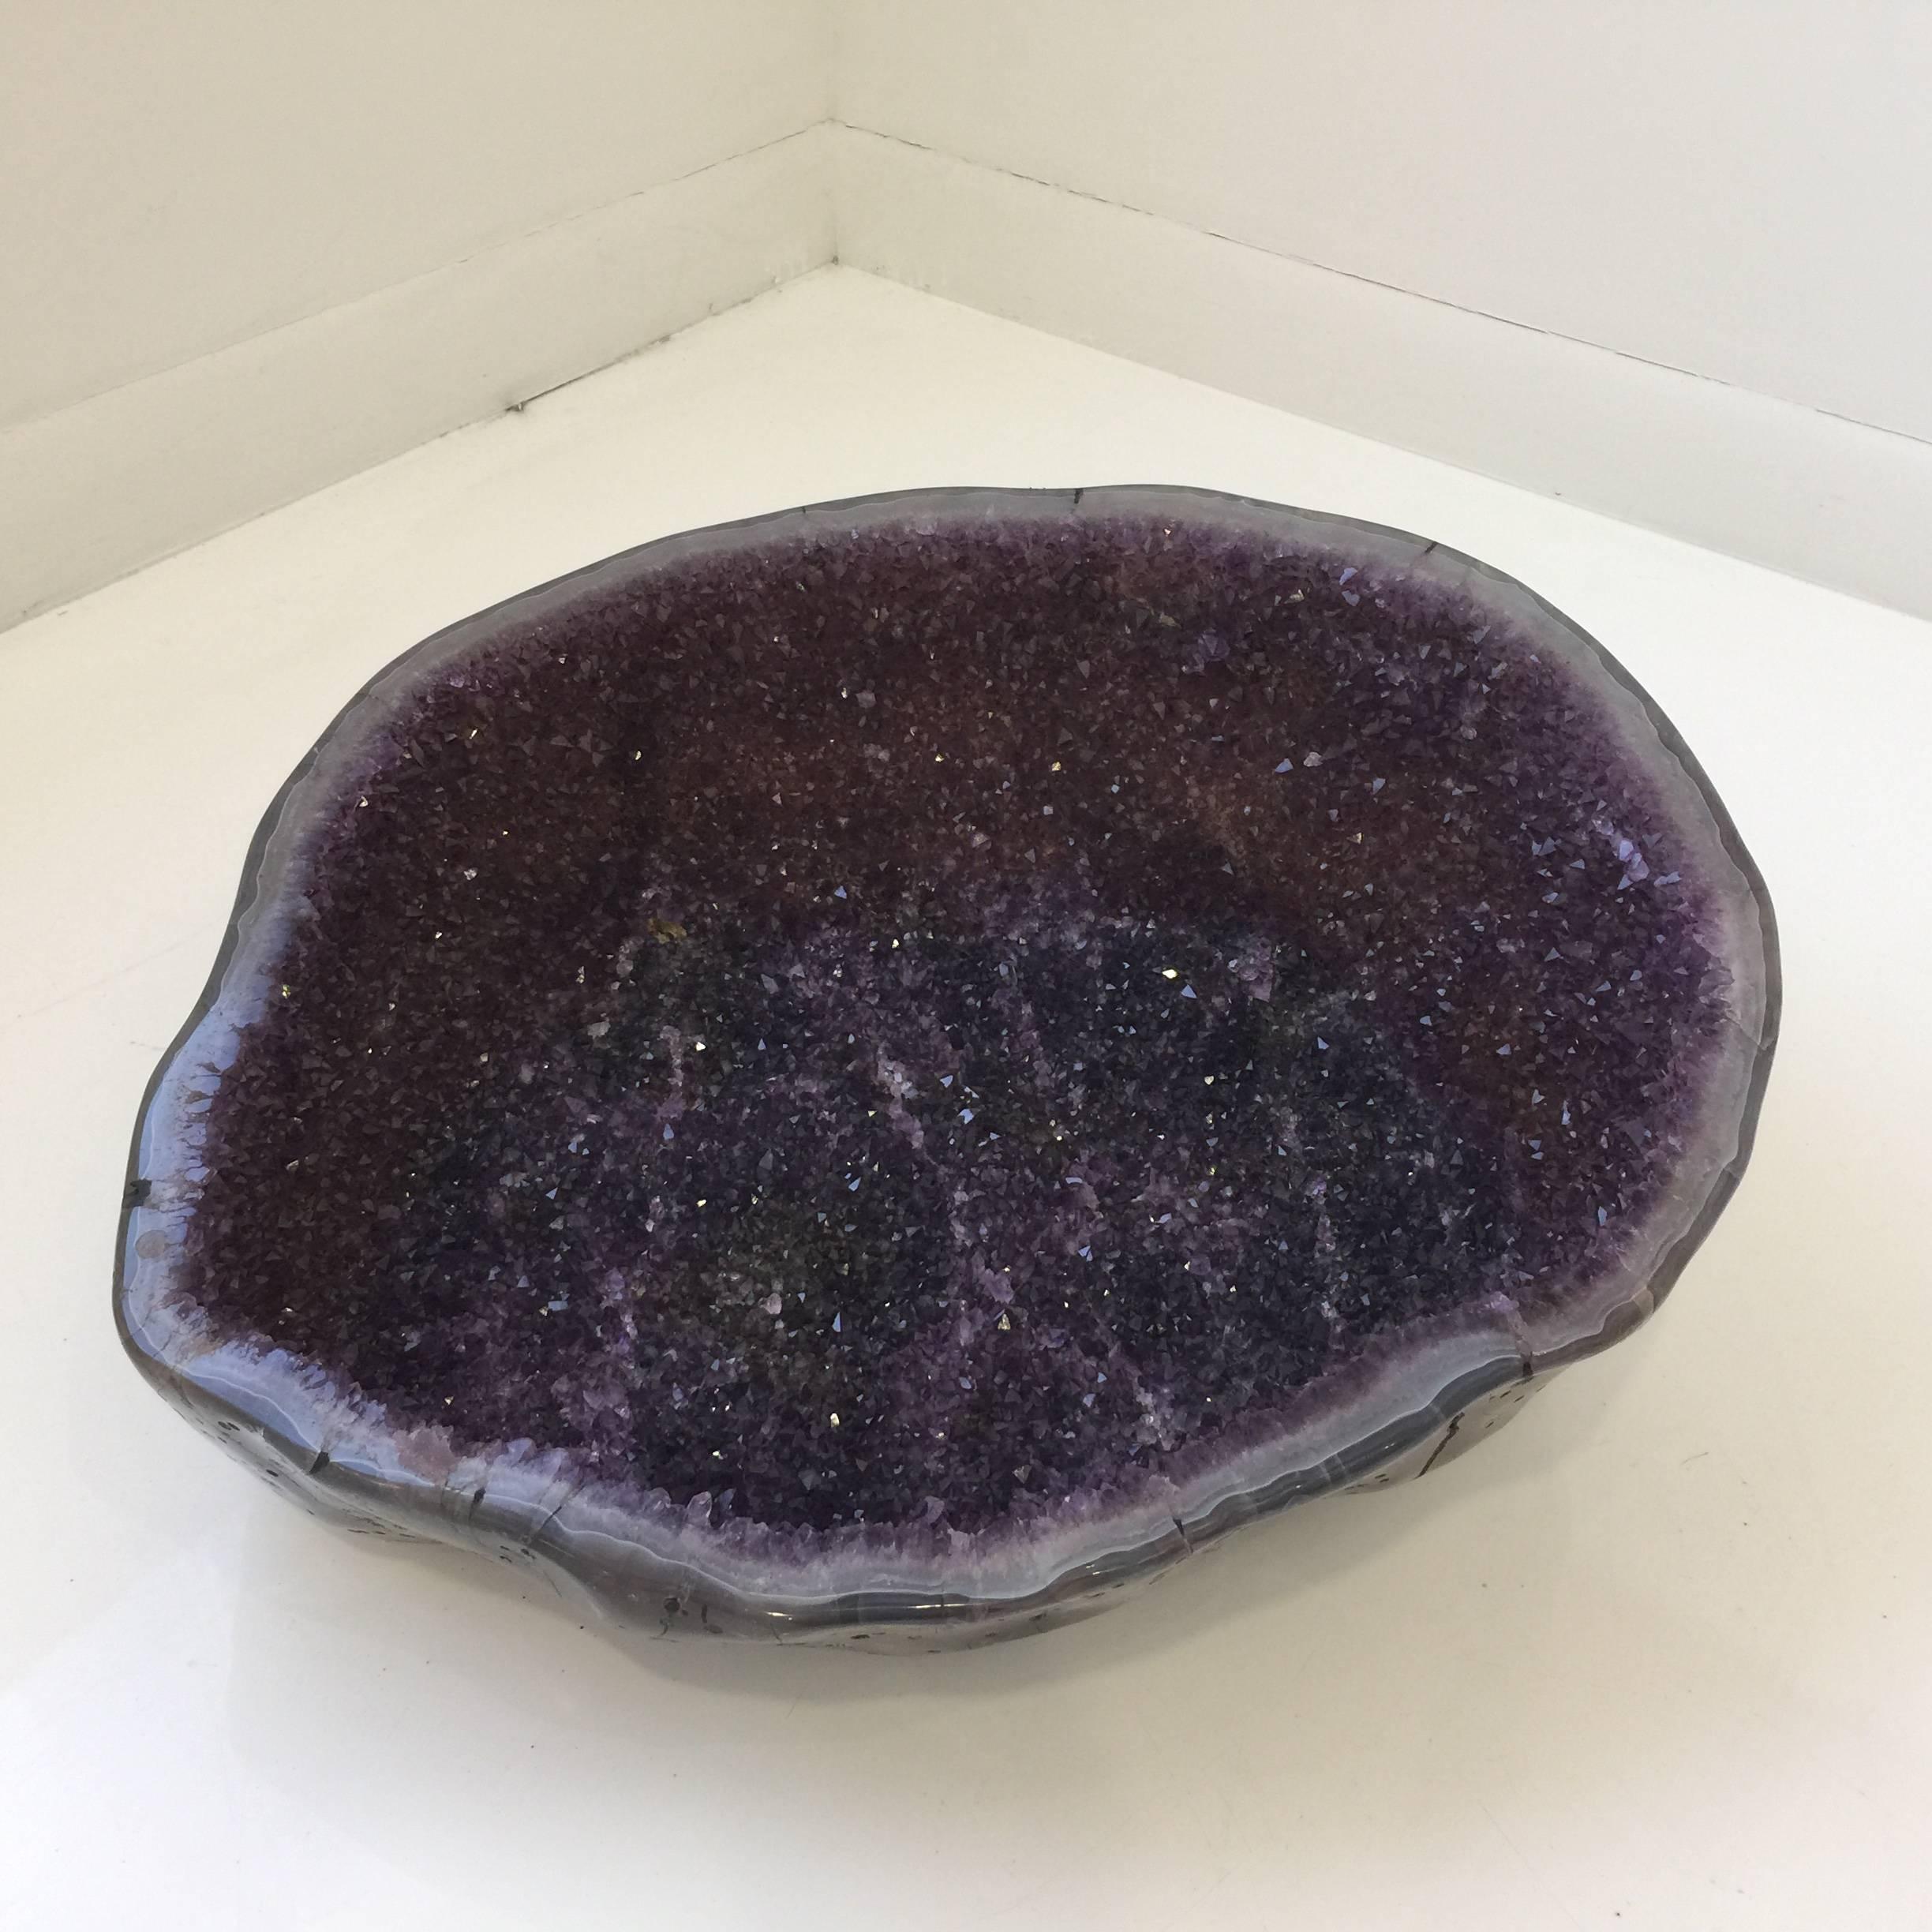 Deep purple crystallized Amethyst bowl, polished exterior of bowl with resin coat that protects the geode.